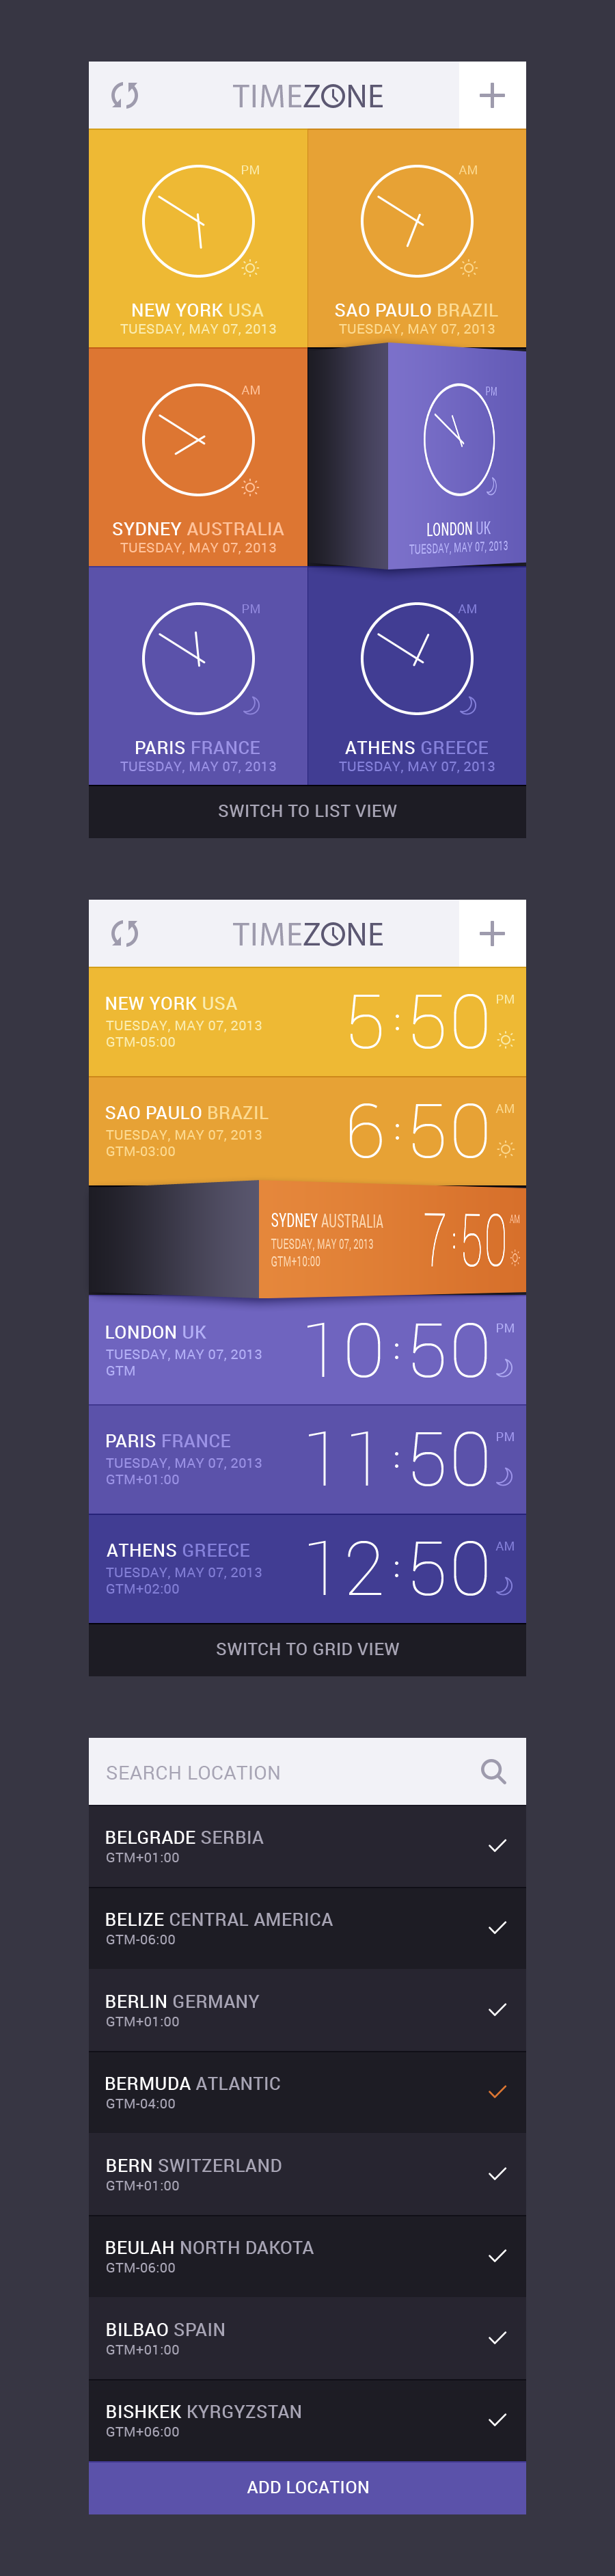 Time Zone App UI | GraphicBurger